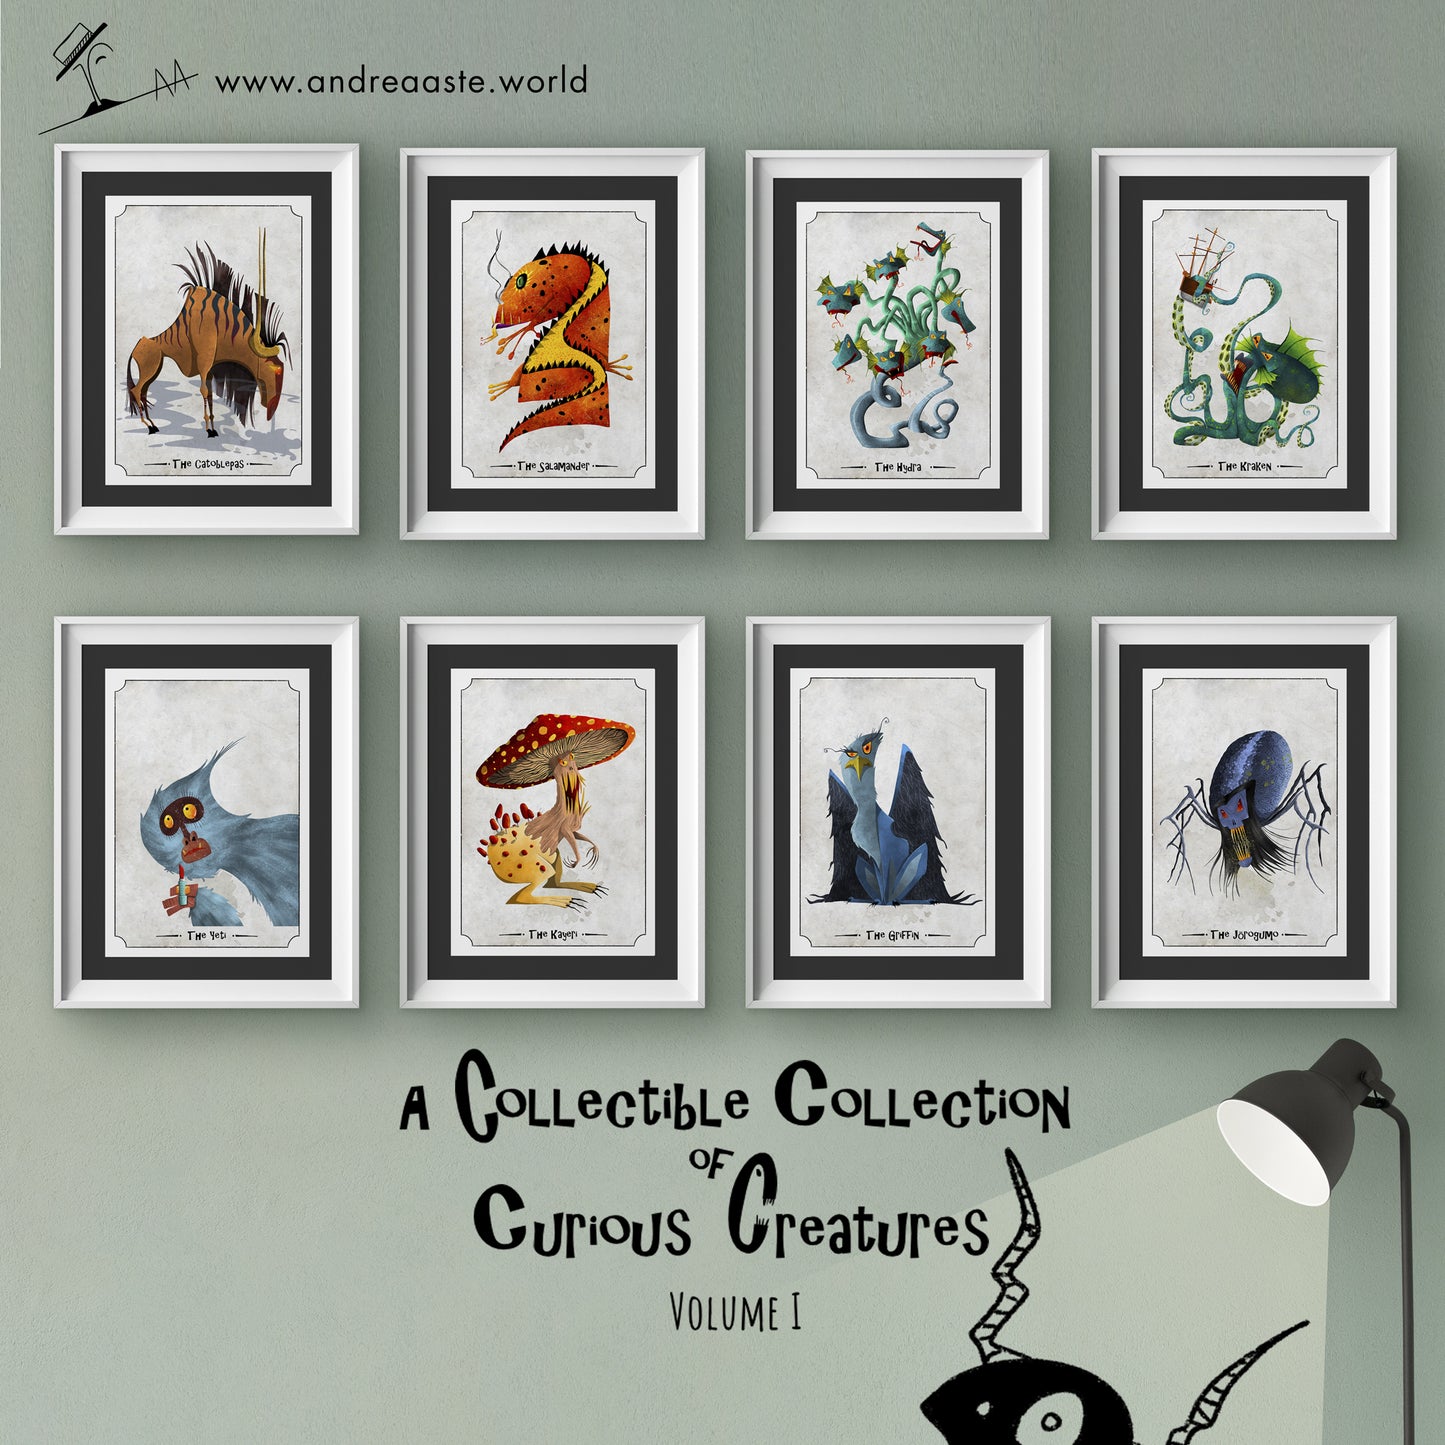 A Collectible Collection of Curious Creatures. Volume I